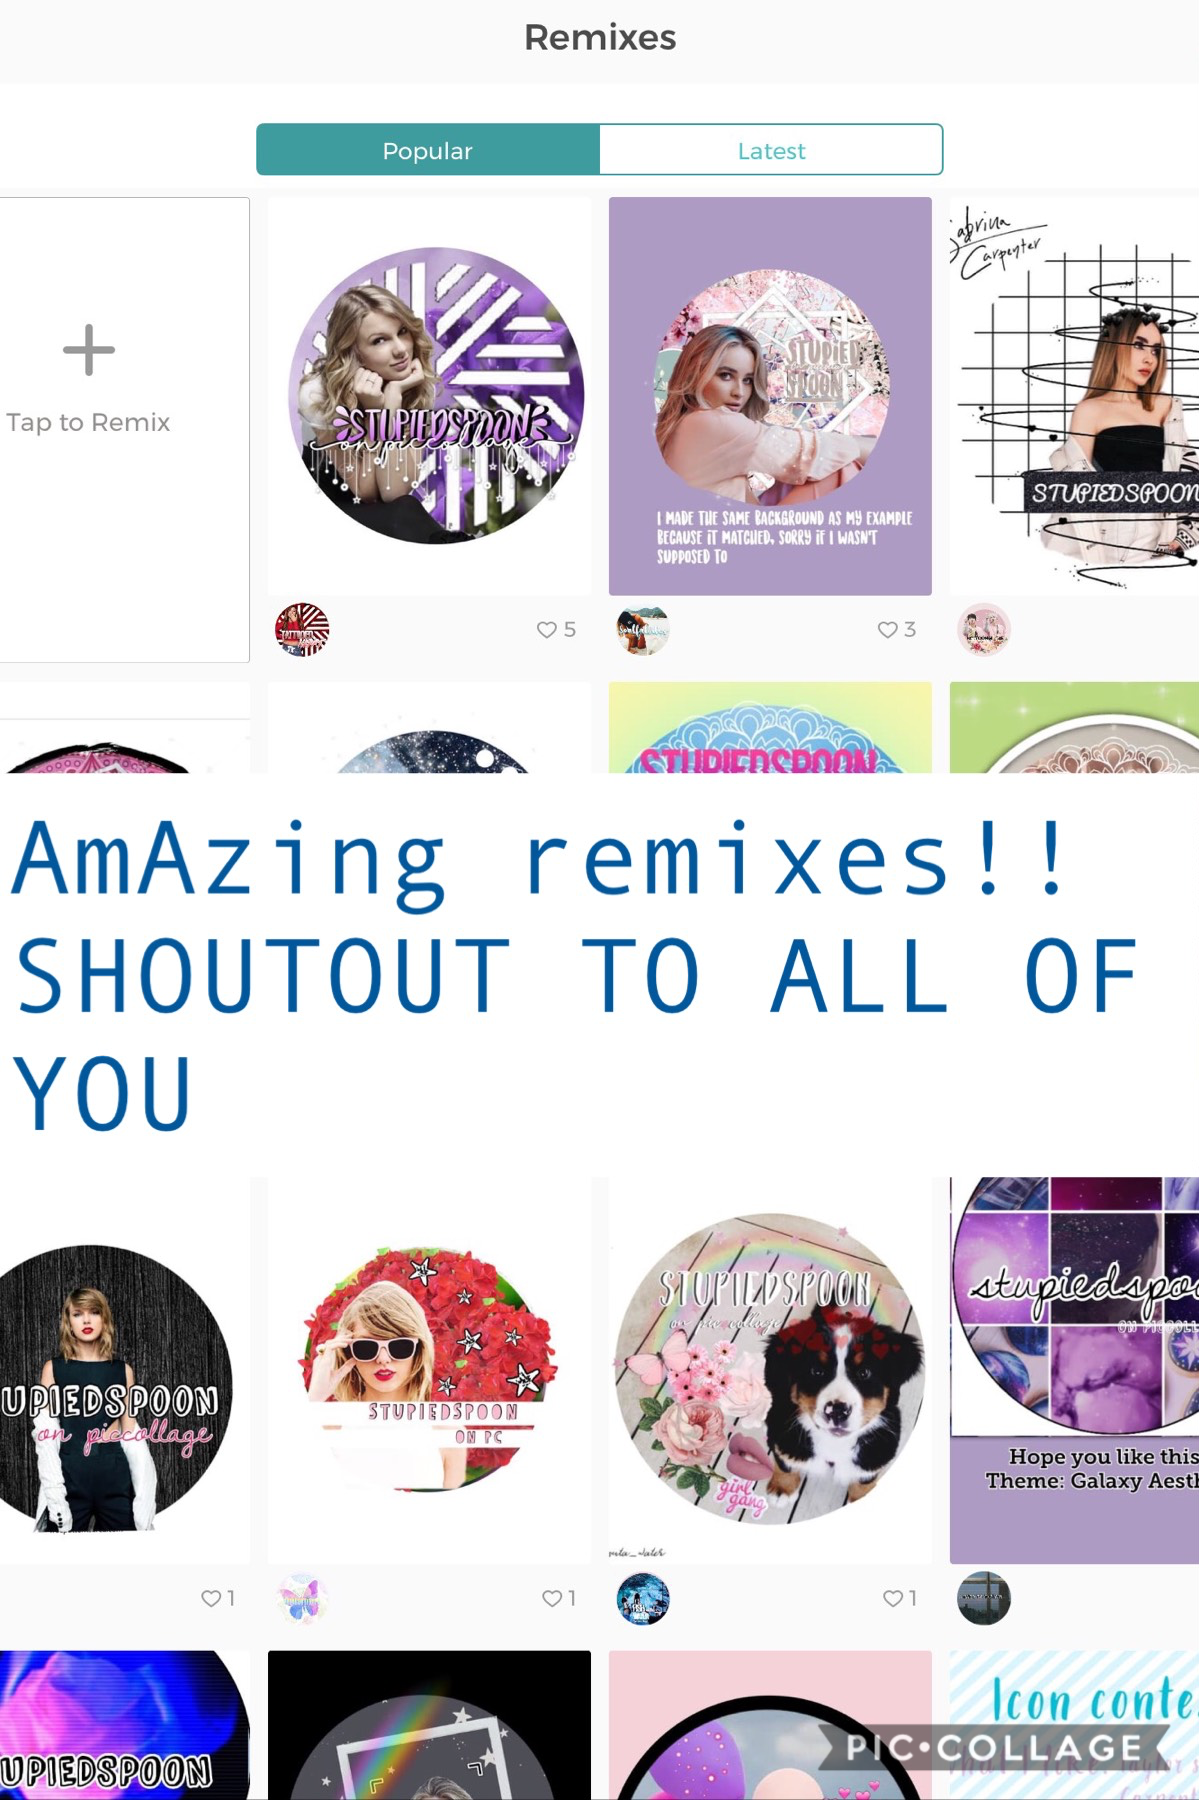 GUYS!! YOUR REMIXES ARE SOOO AWESOME!! HOW CAN I CHOOSE THE WINNERS?